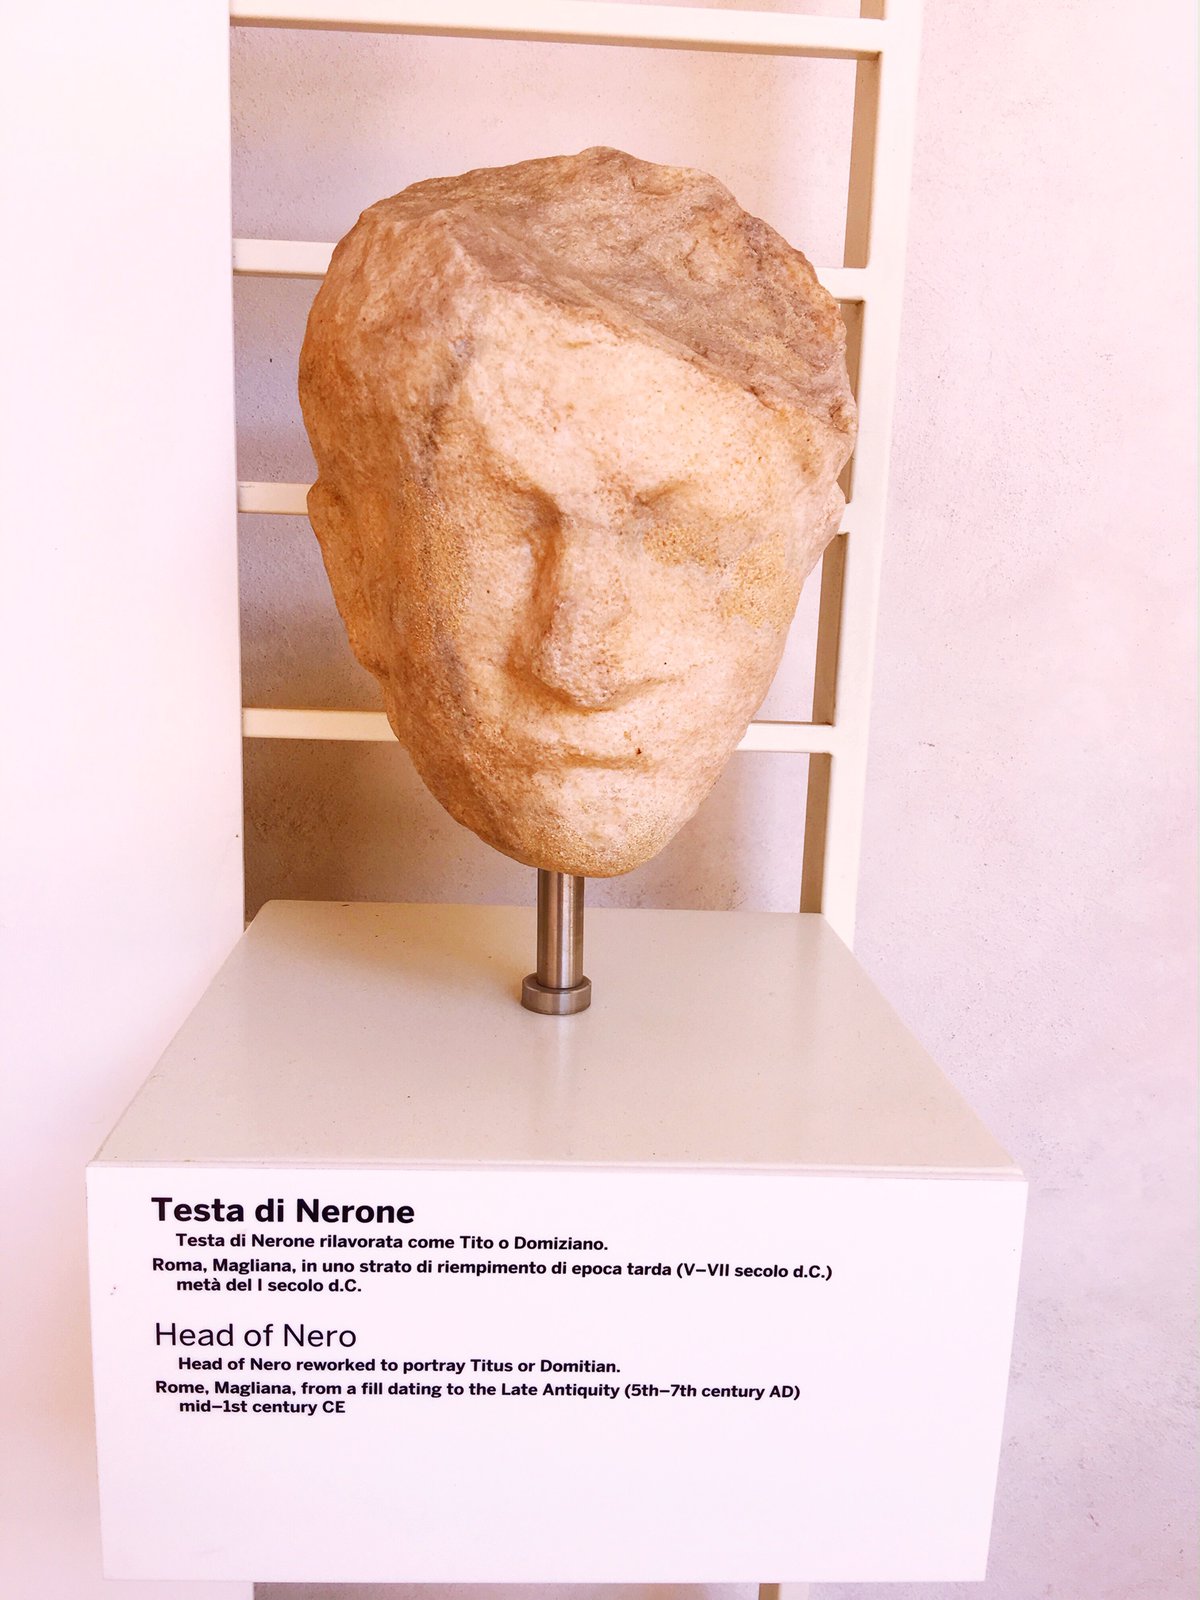 Bust of Nero from the 1st century A.D, at the Baths of Diocletian in Rome